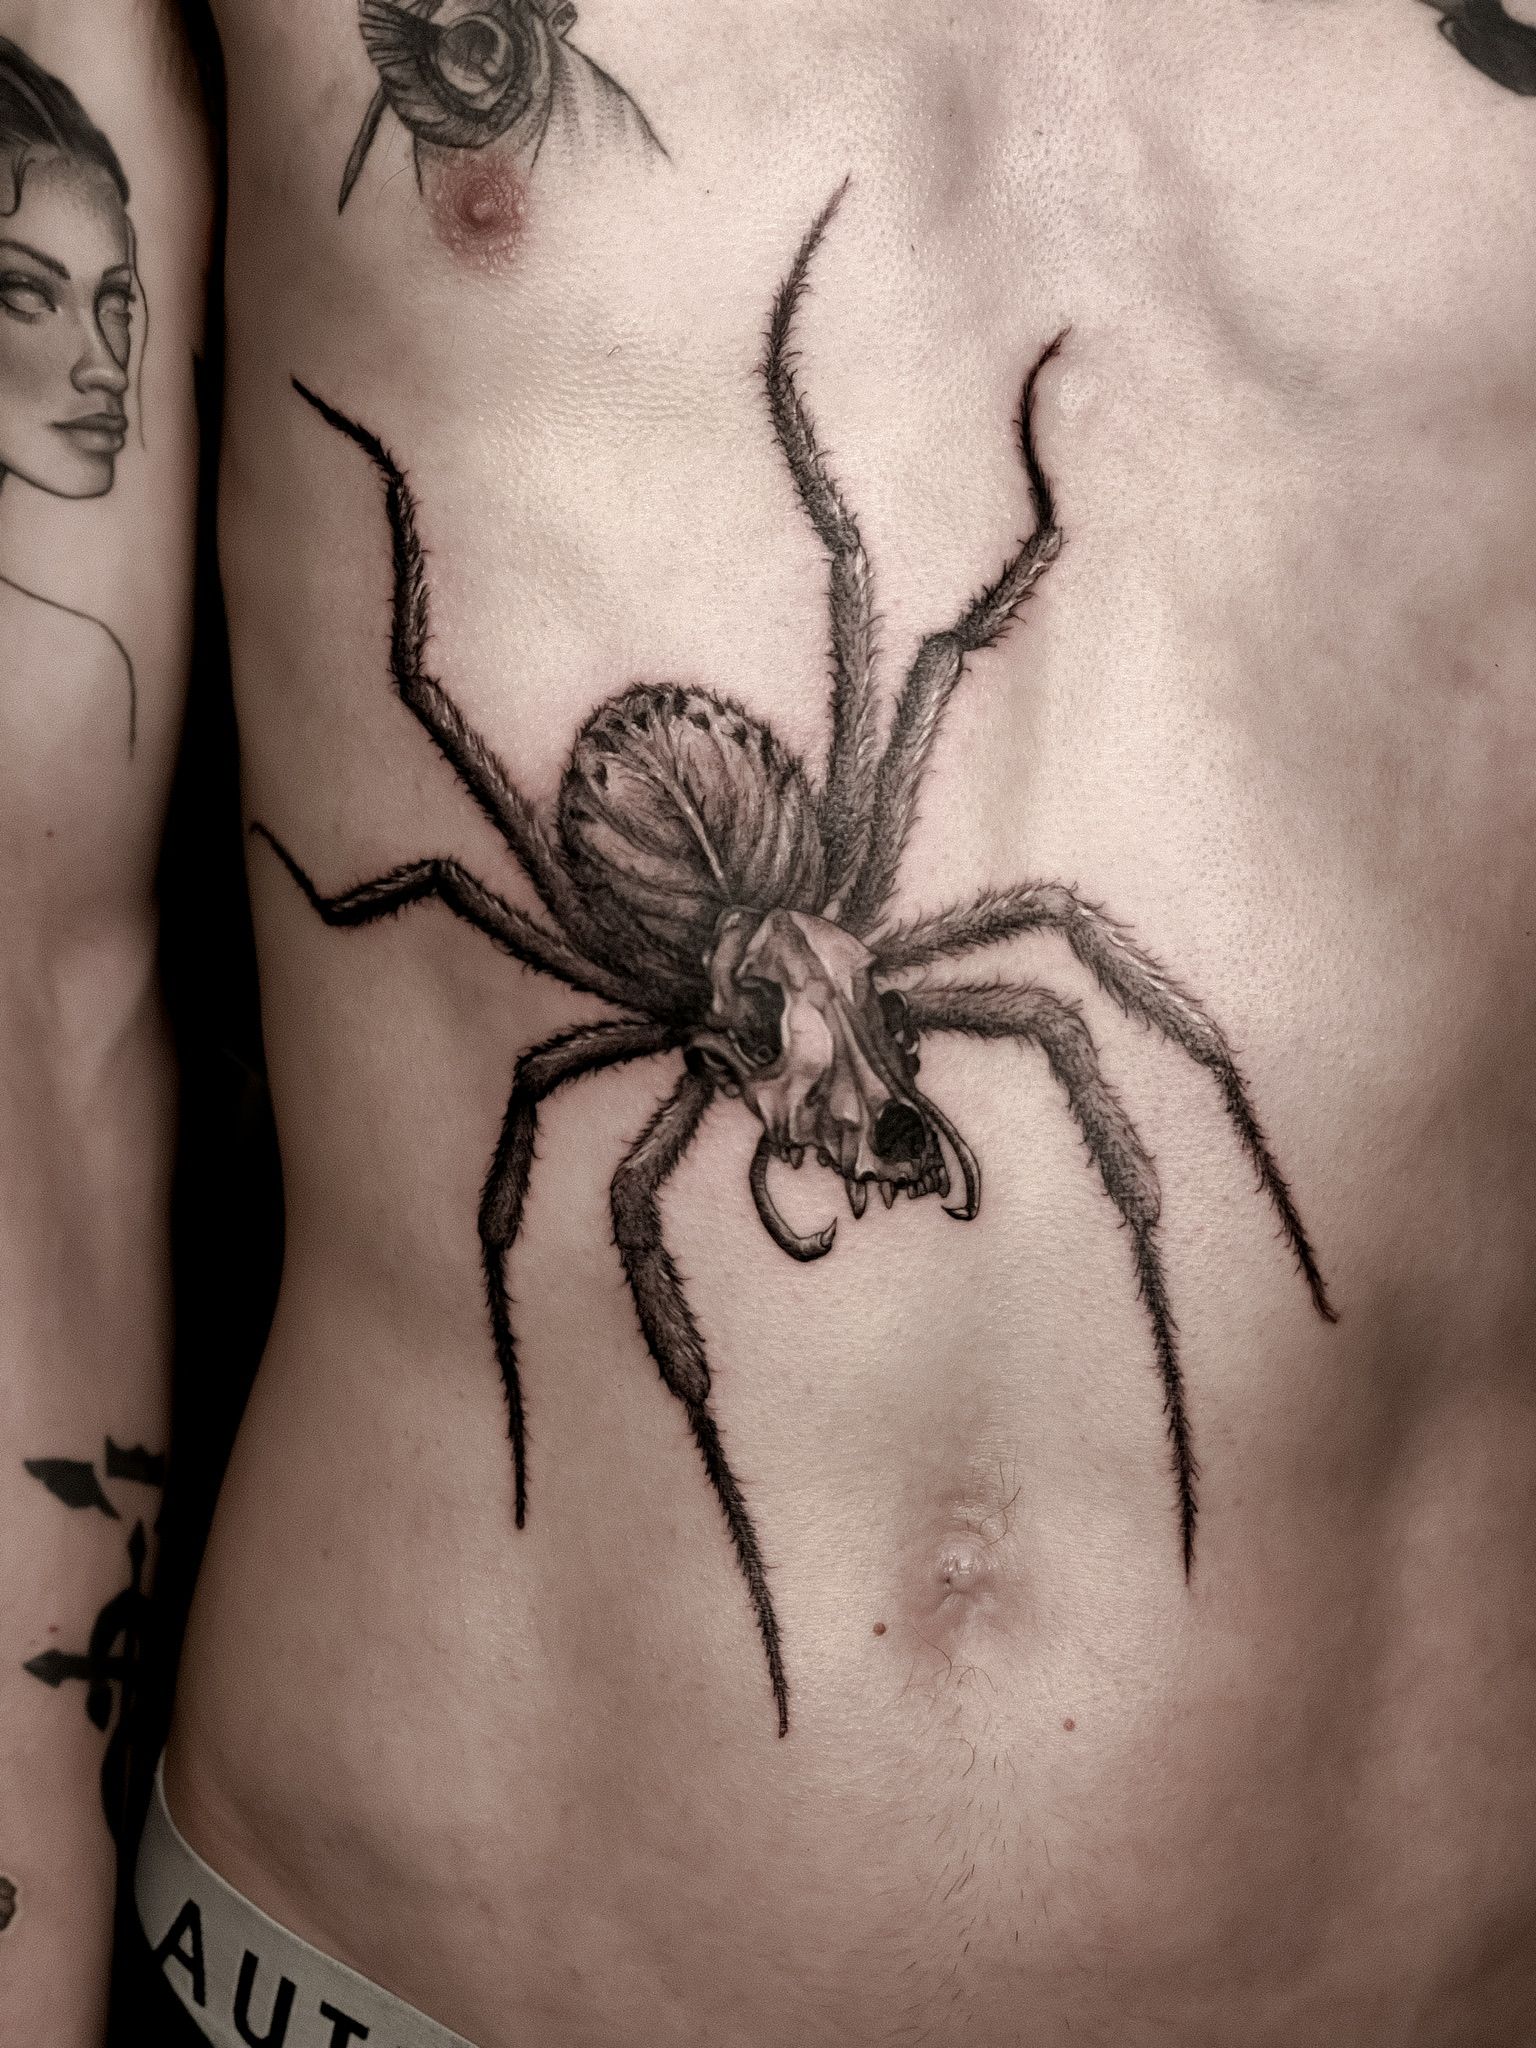 Pin on Spider and scorpion tattoo design